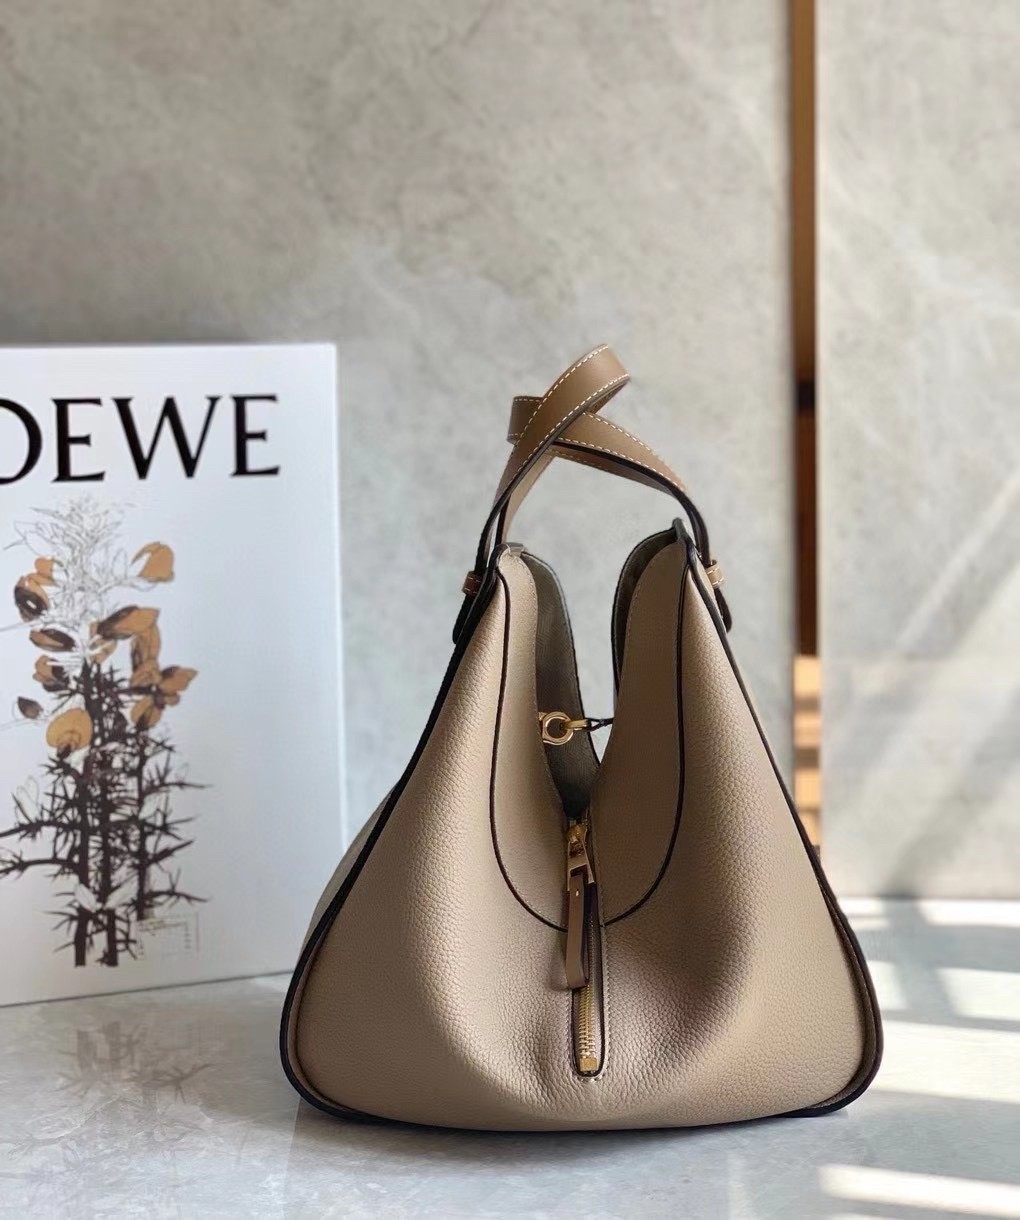 Loewe Hammock Small Bag In Sand Grained Leather 337